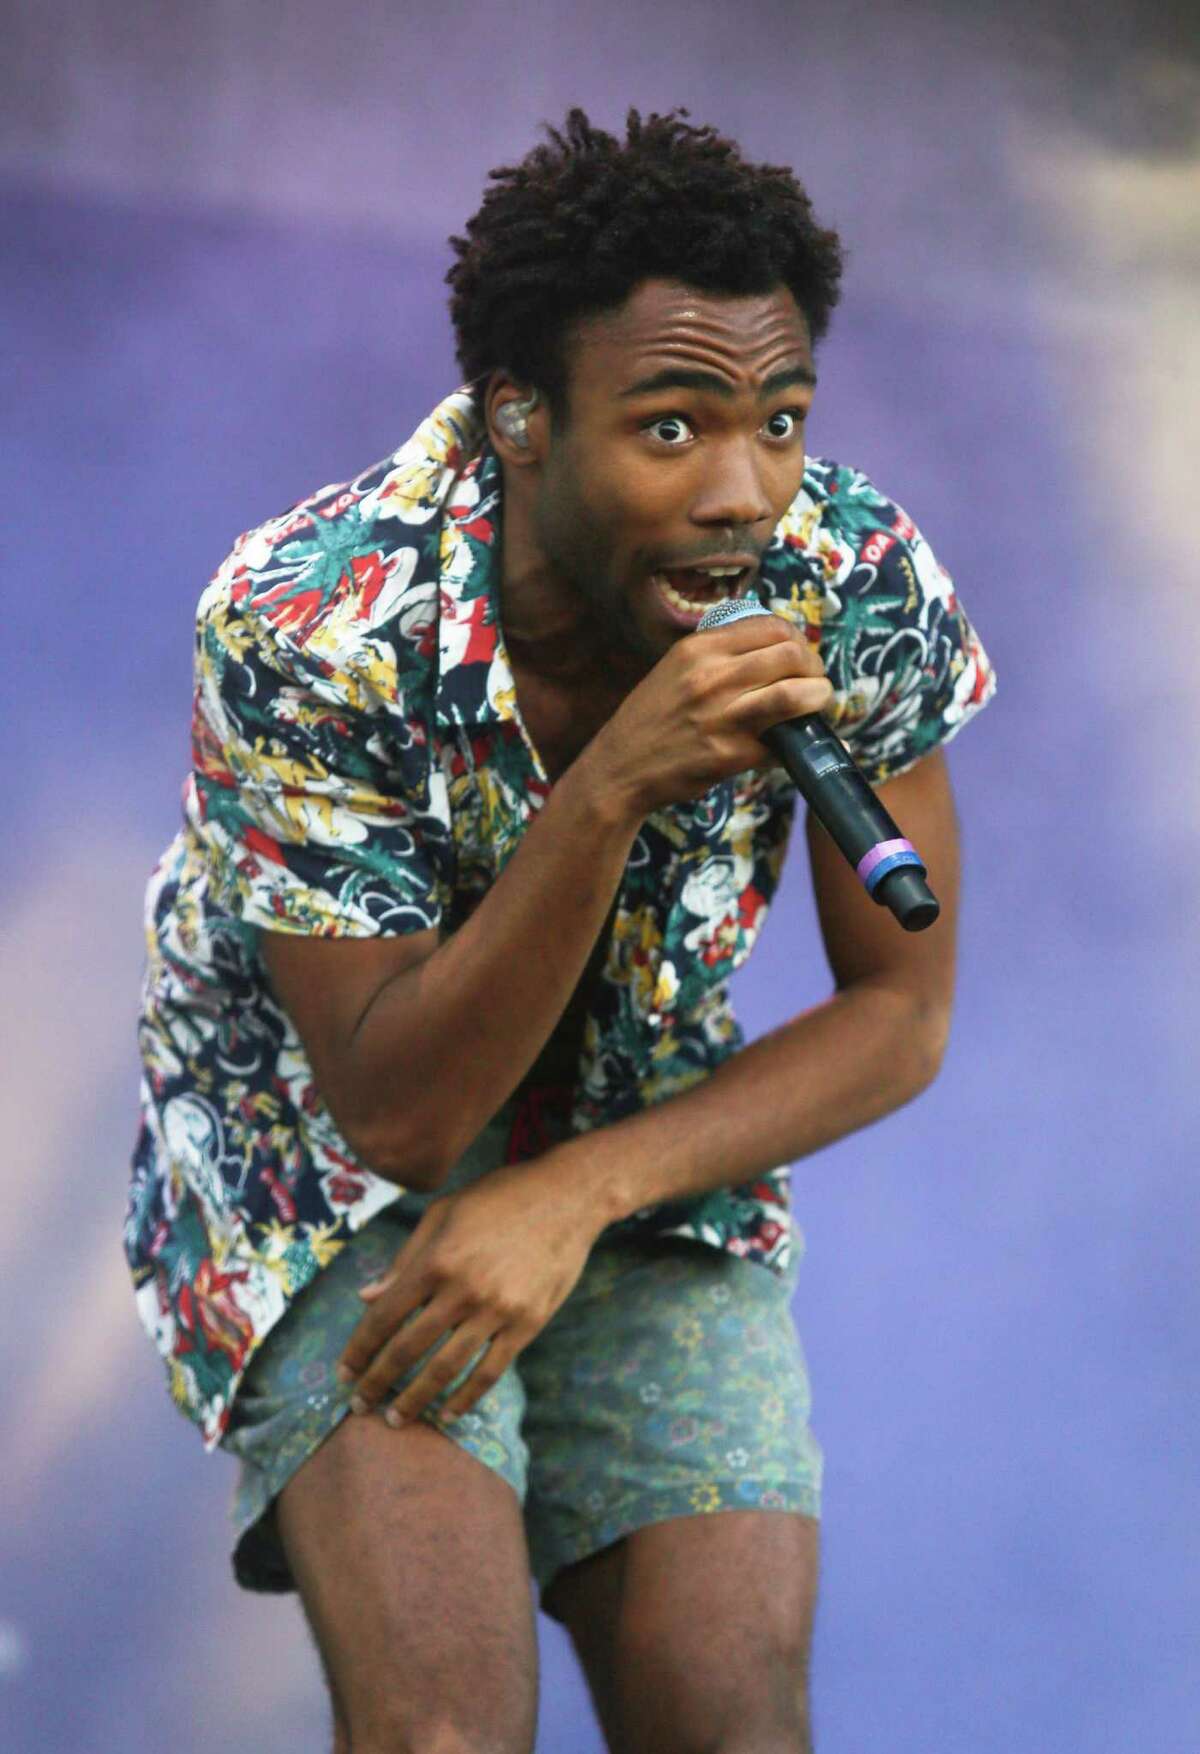 Childish Gambino, aka Donald Glover, performs on the first day of the Austin City Limits Music Festival on Friday, Oct. 3, 2014, in Austin, Texas. (Photo by Jack Plunkett/Invision/AP)